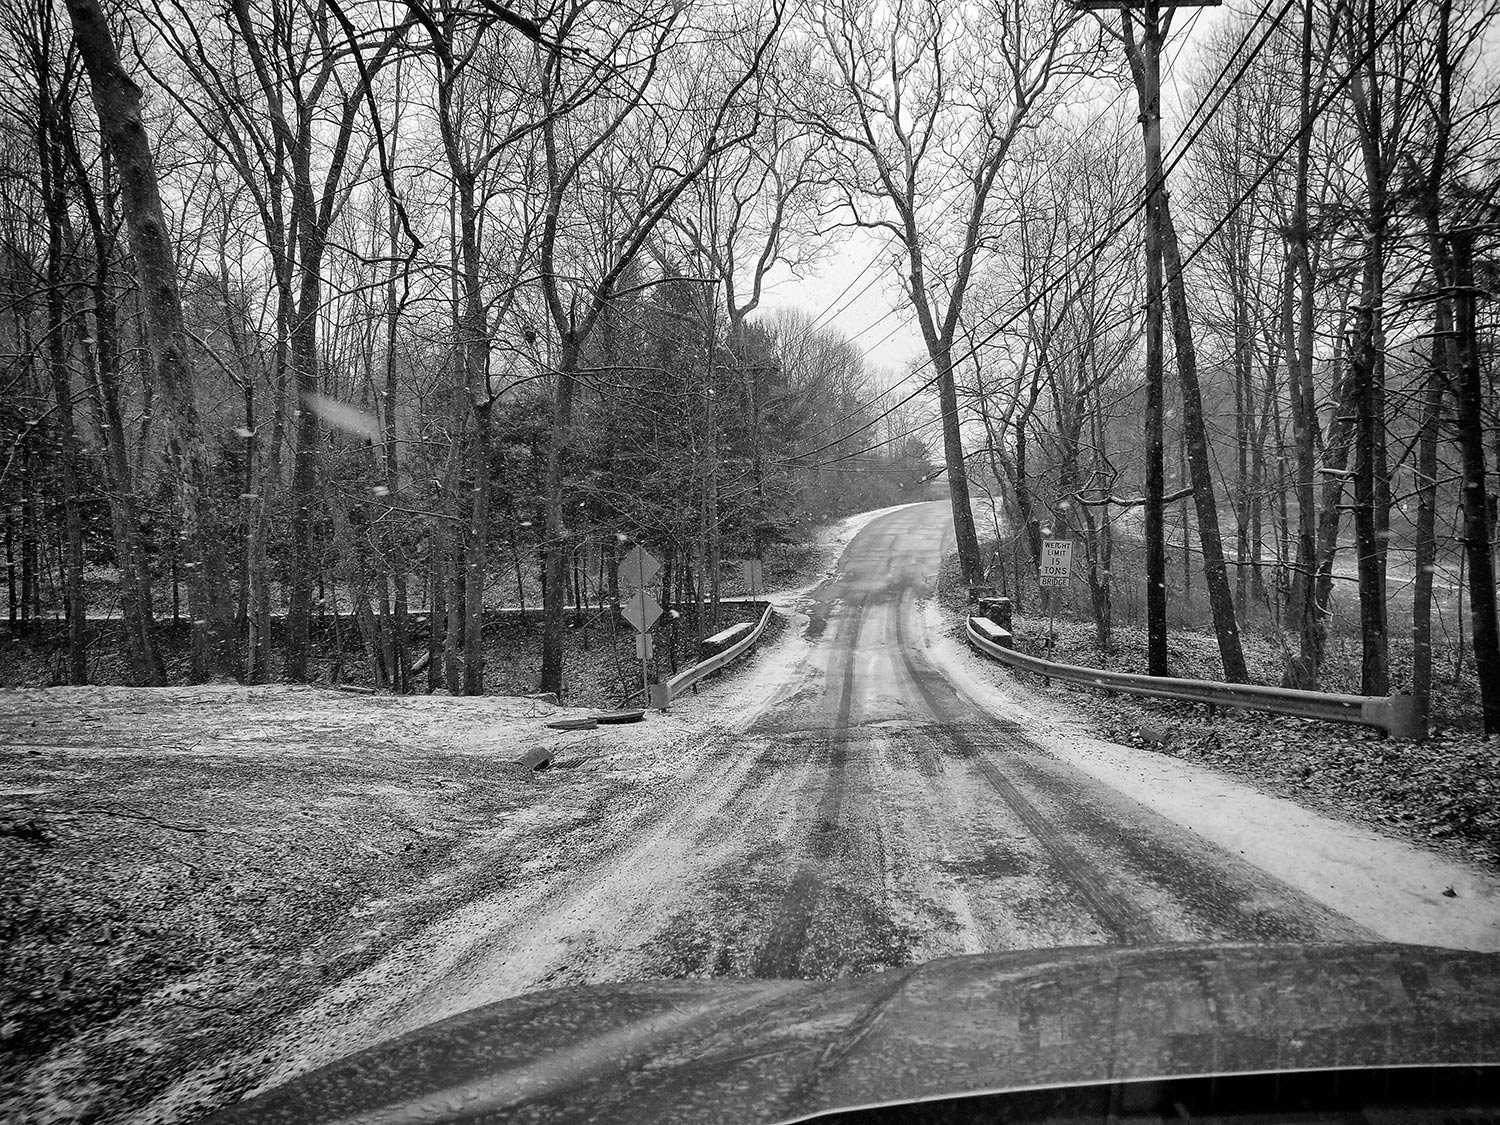 Snowy Road ©2021 by bret wills